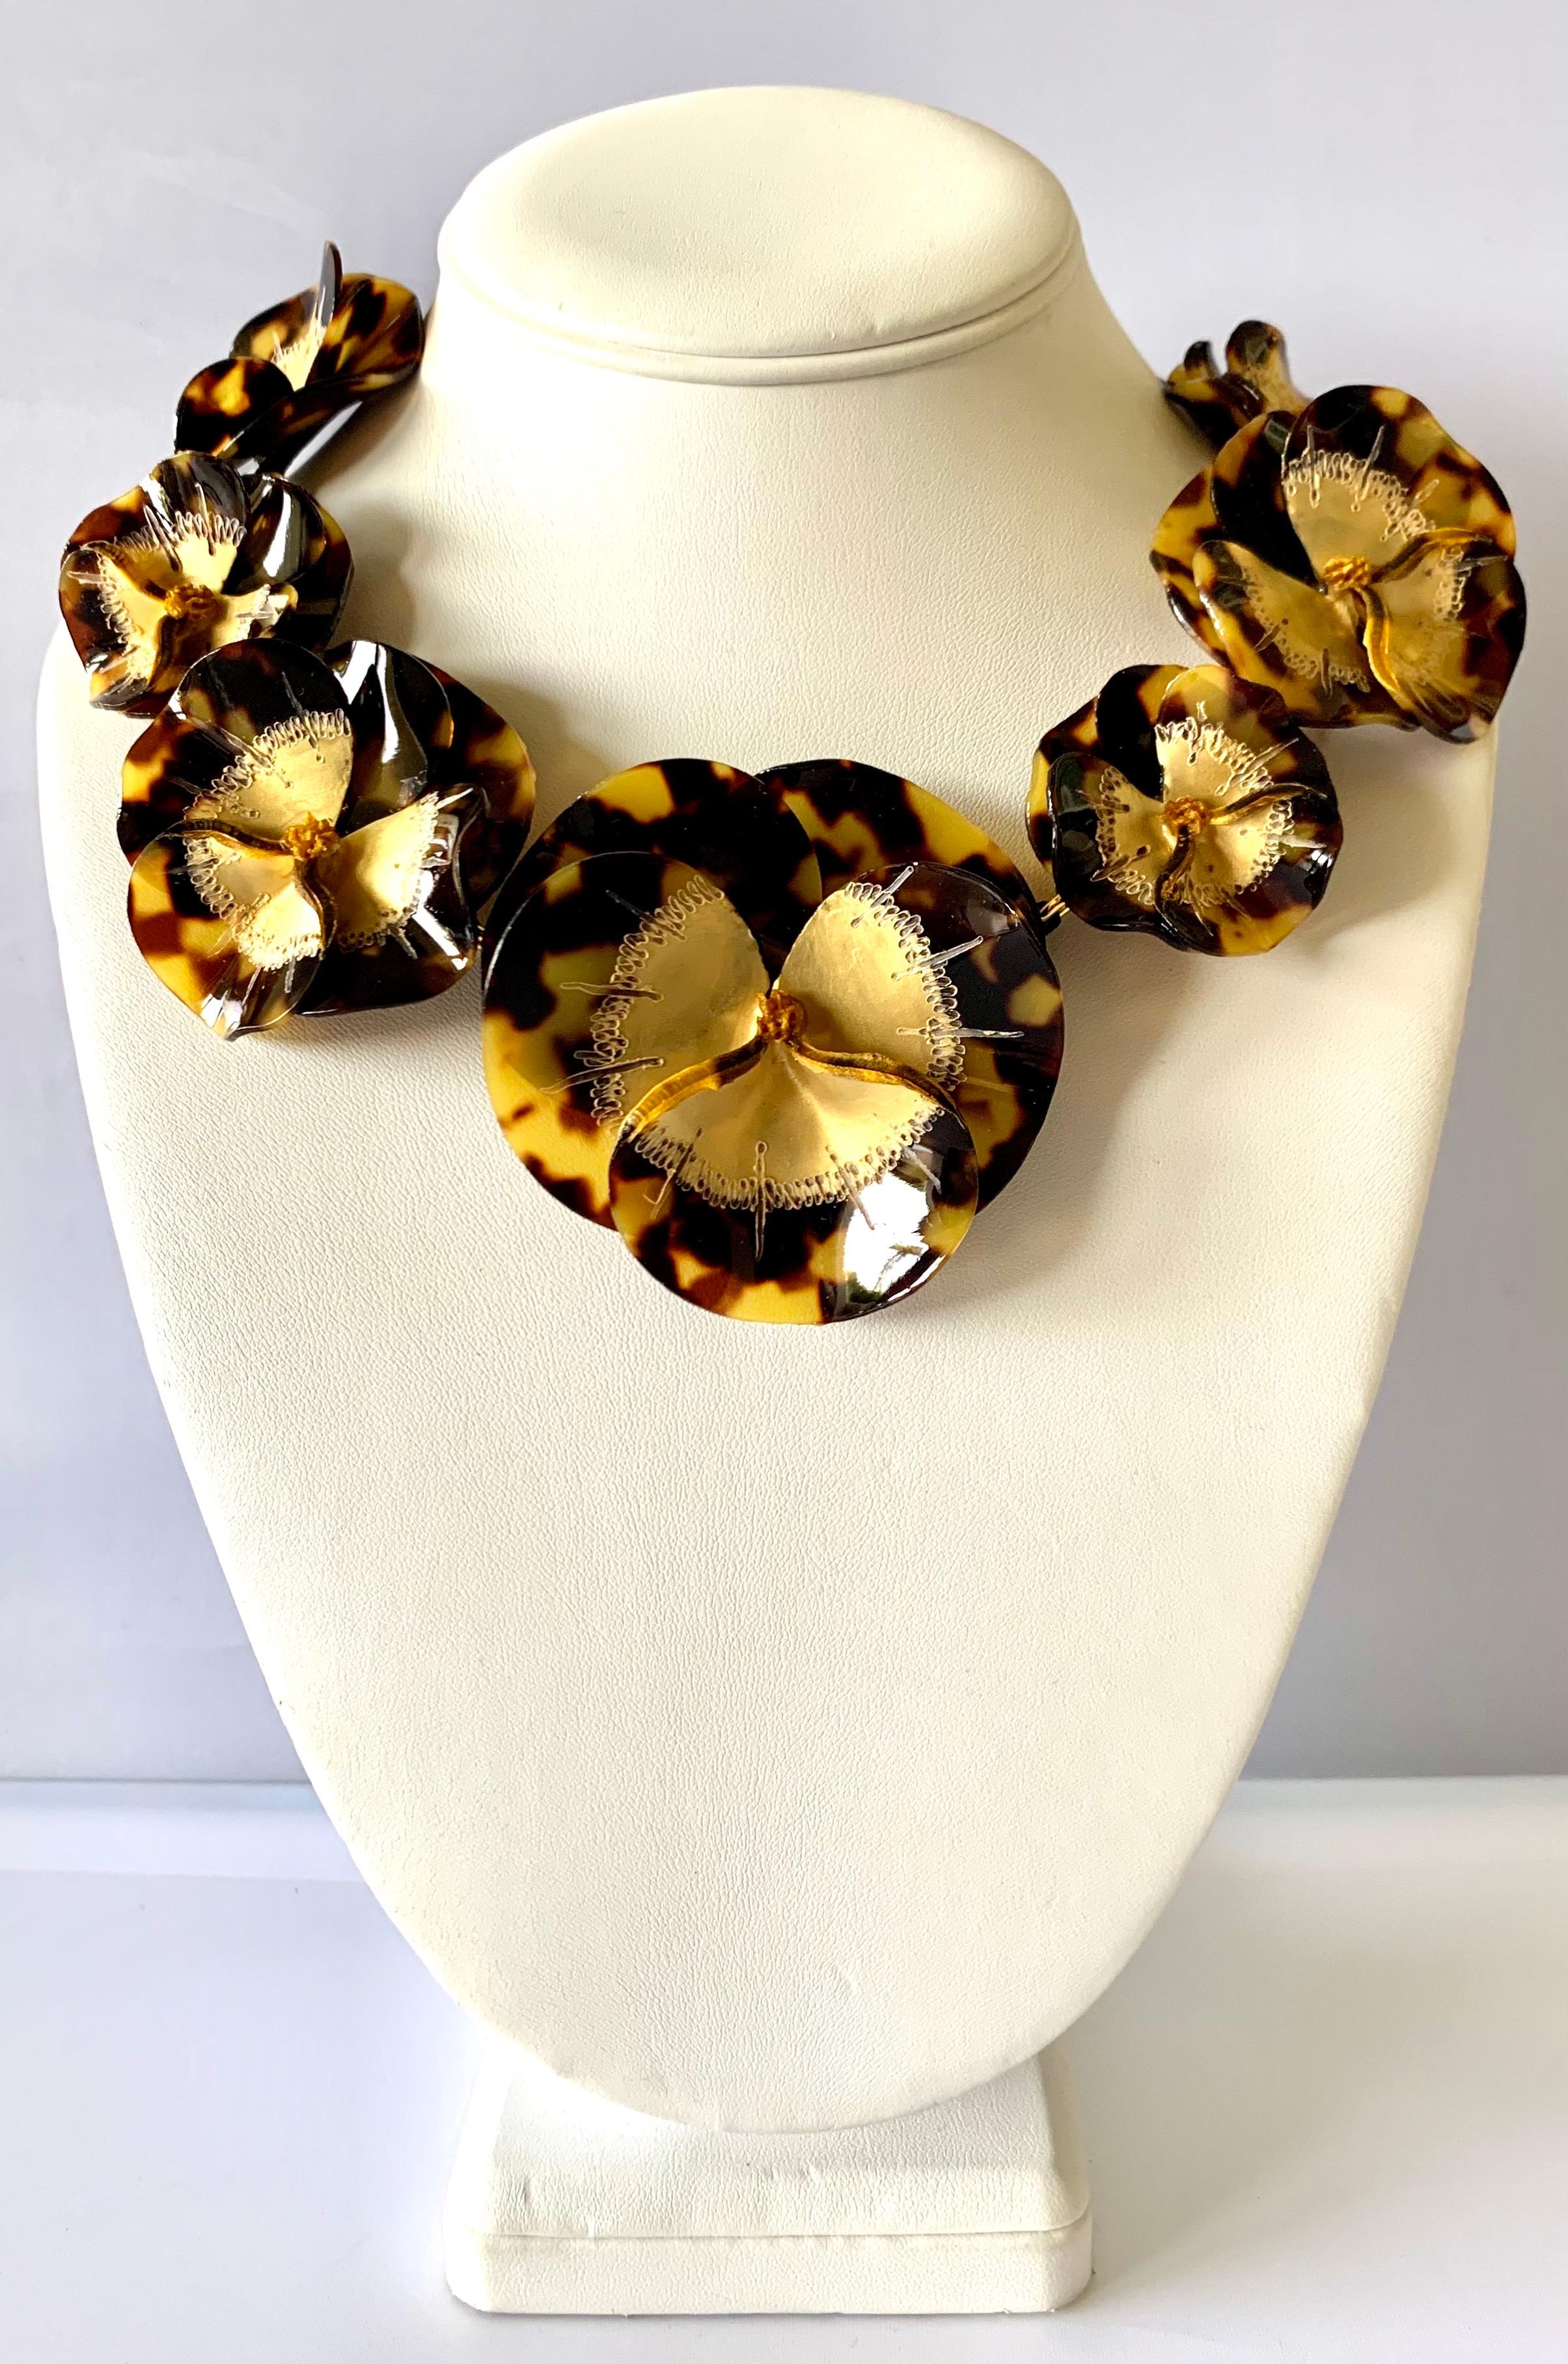 Contemporary artisanal necklace comprised out of seven faux tortoise three-dimensional pansy flowers - the flowers are gold-leafed at the center giving the necklace depth and sophistication. Handcrafted in France by Cilea Paris.